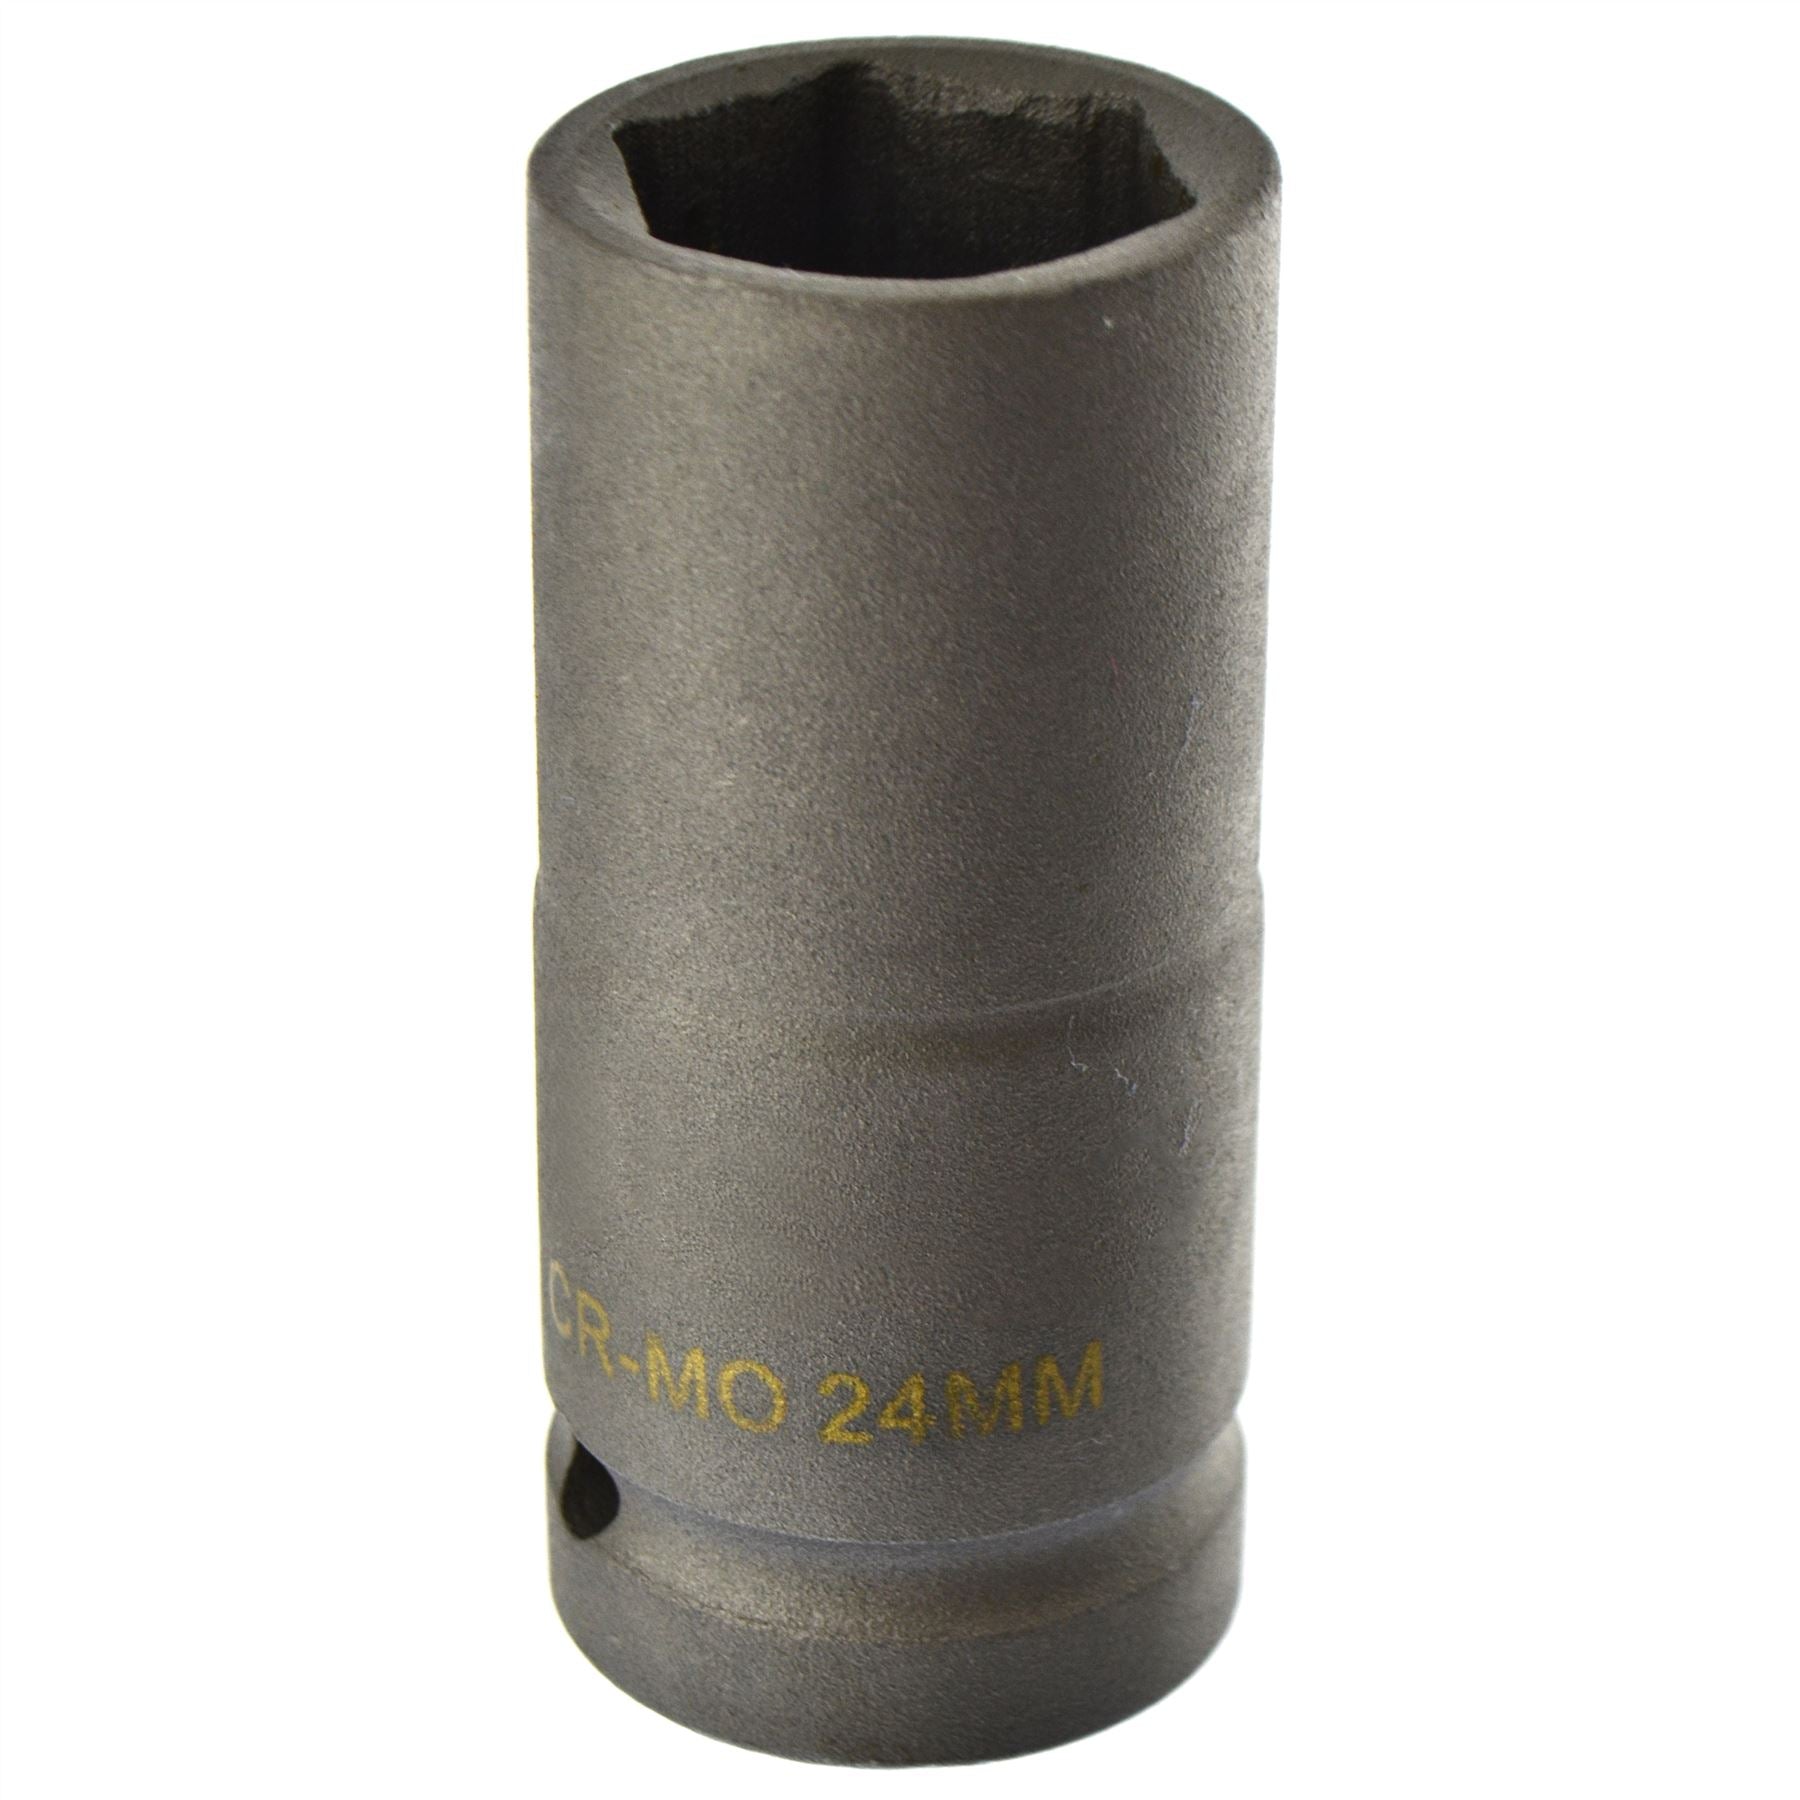 24mm Metric 3/4 Drive Double Deep Impact Socket 6 Sided Single Hex Thick Walled